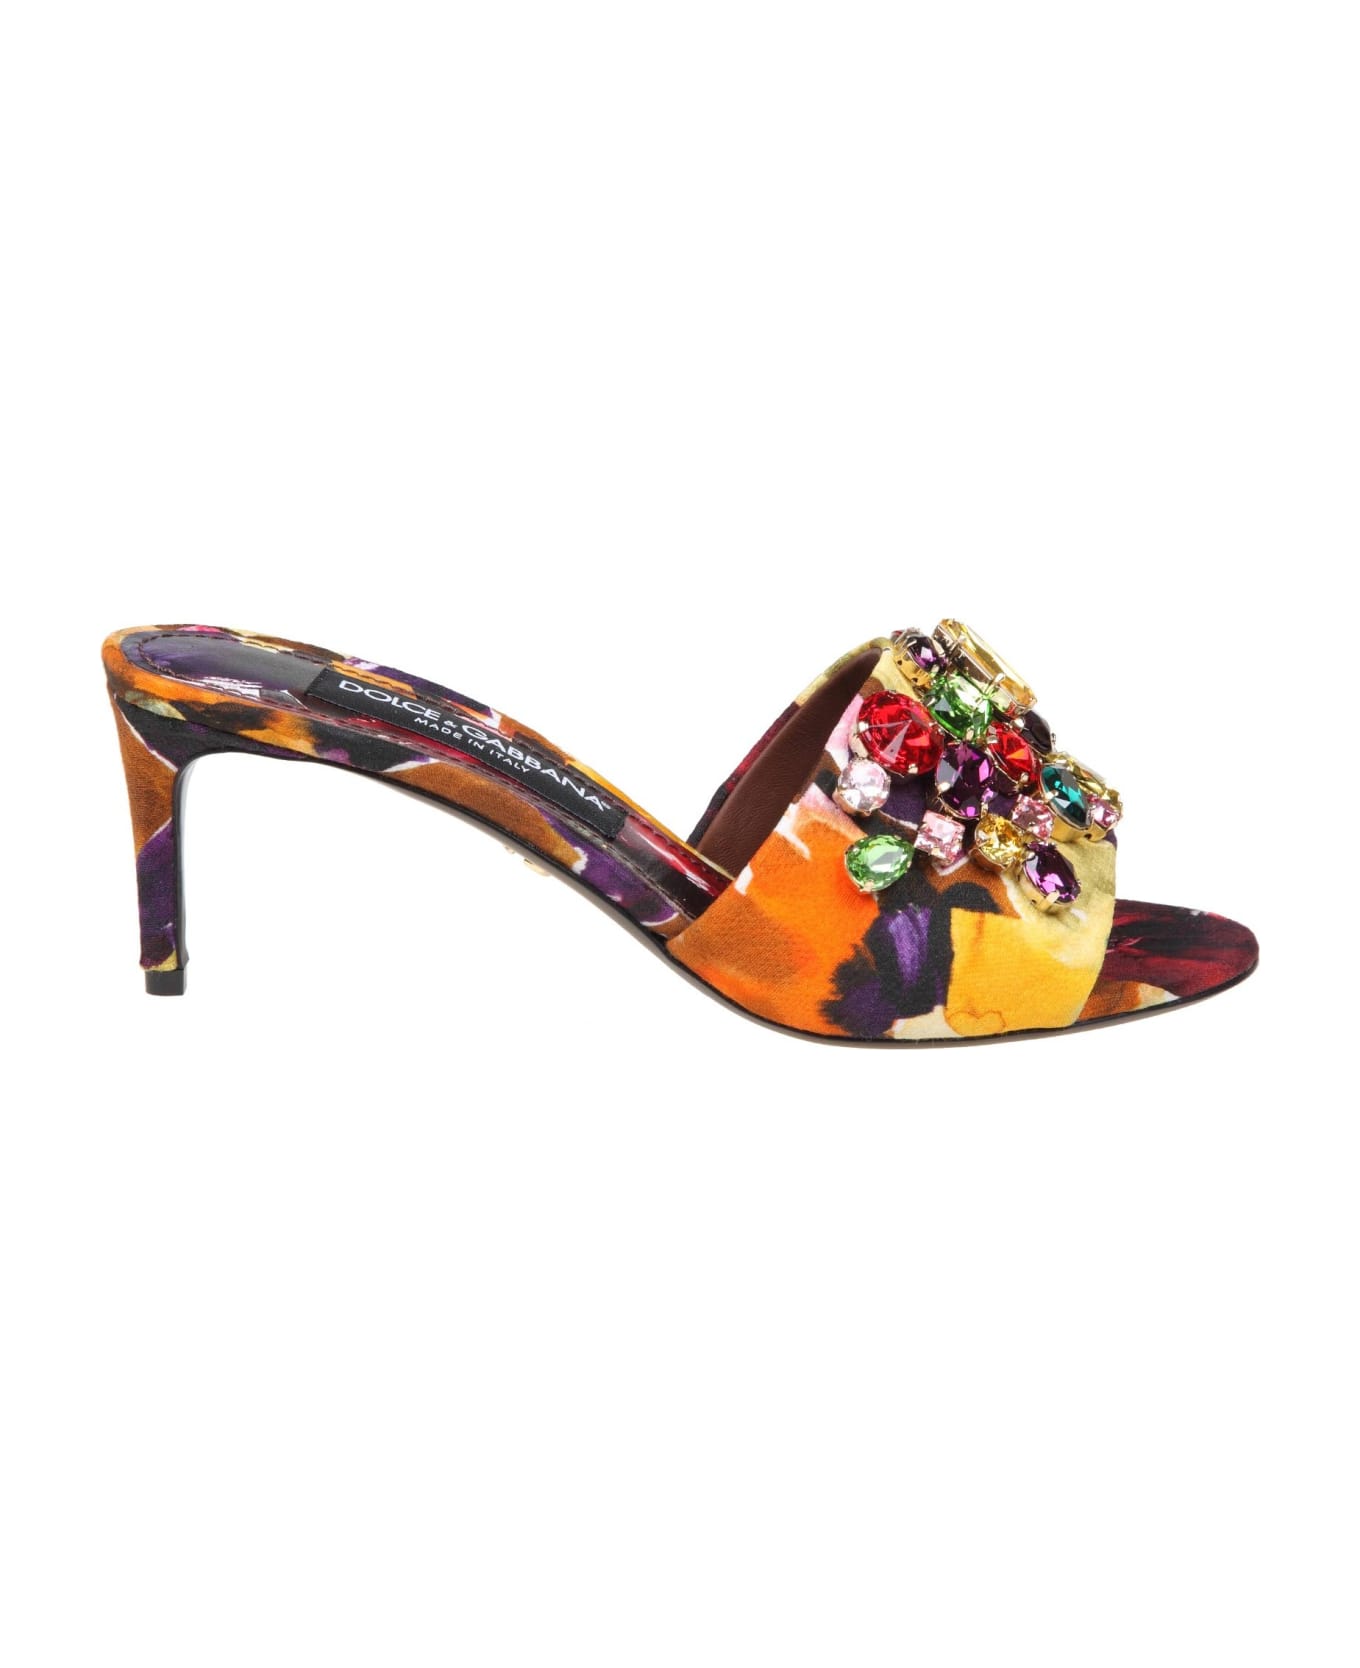 Dolce & Gabbana Slippers In Brocade Fabric With Colored Stones - Yellow サンダル